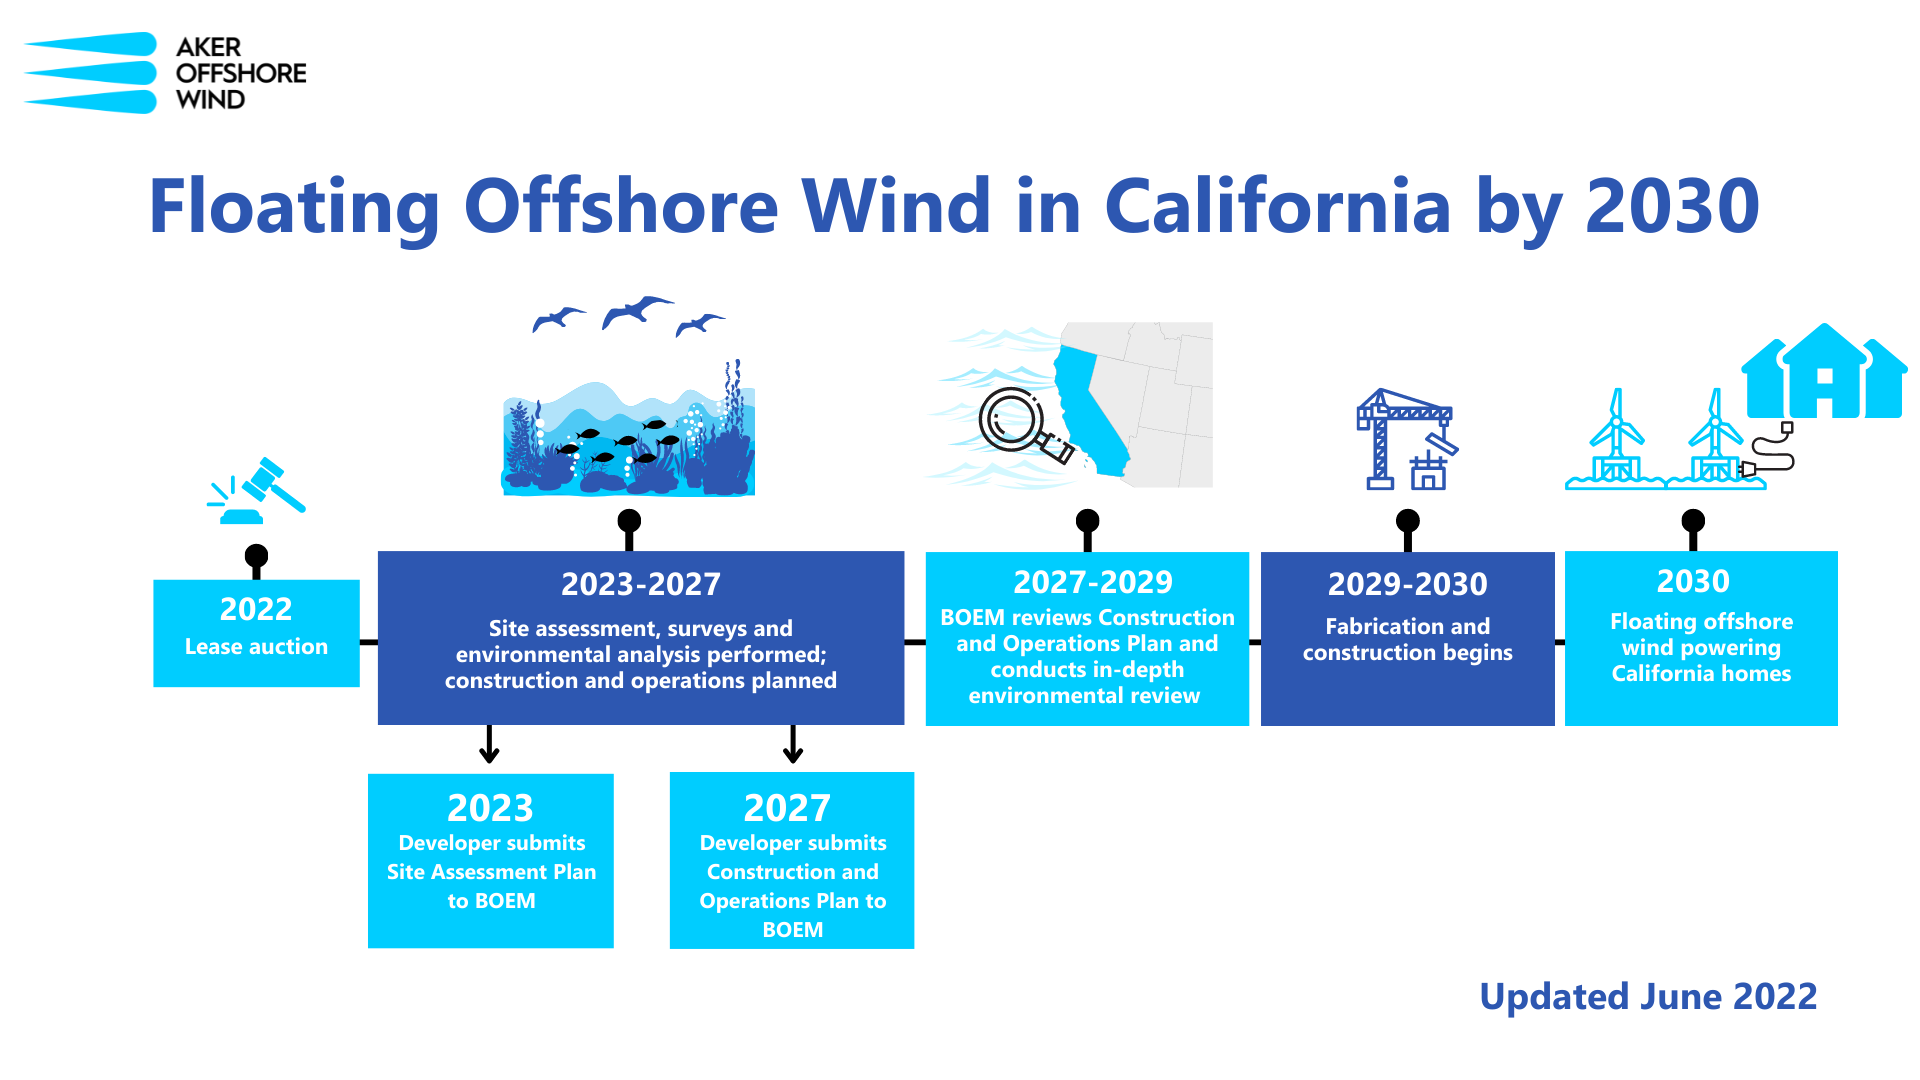 Timeline for Floating Offshore Wind in CA by 2030